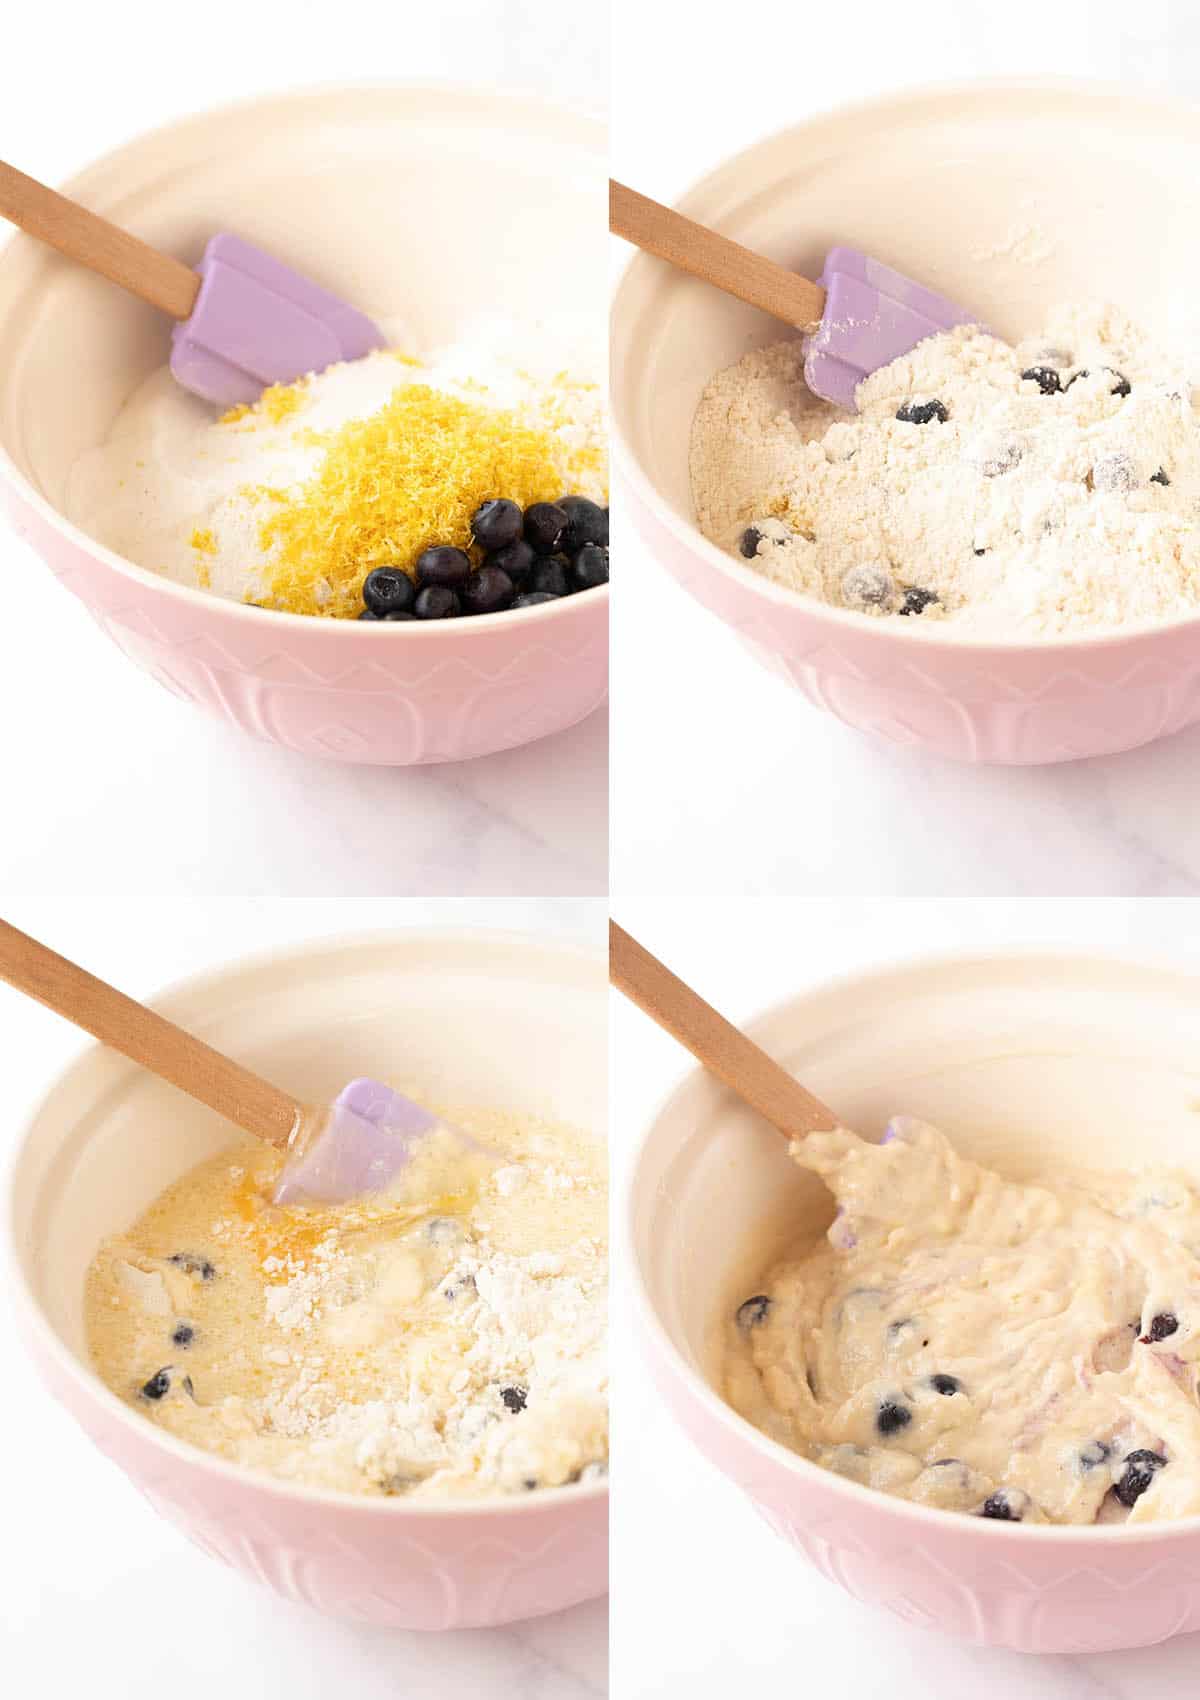 Step by step photos showing how to make Lemon Blueberry Muffins from scratch.